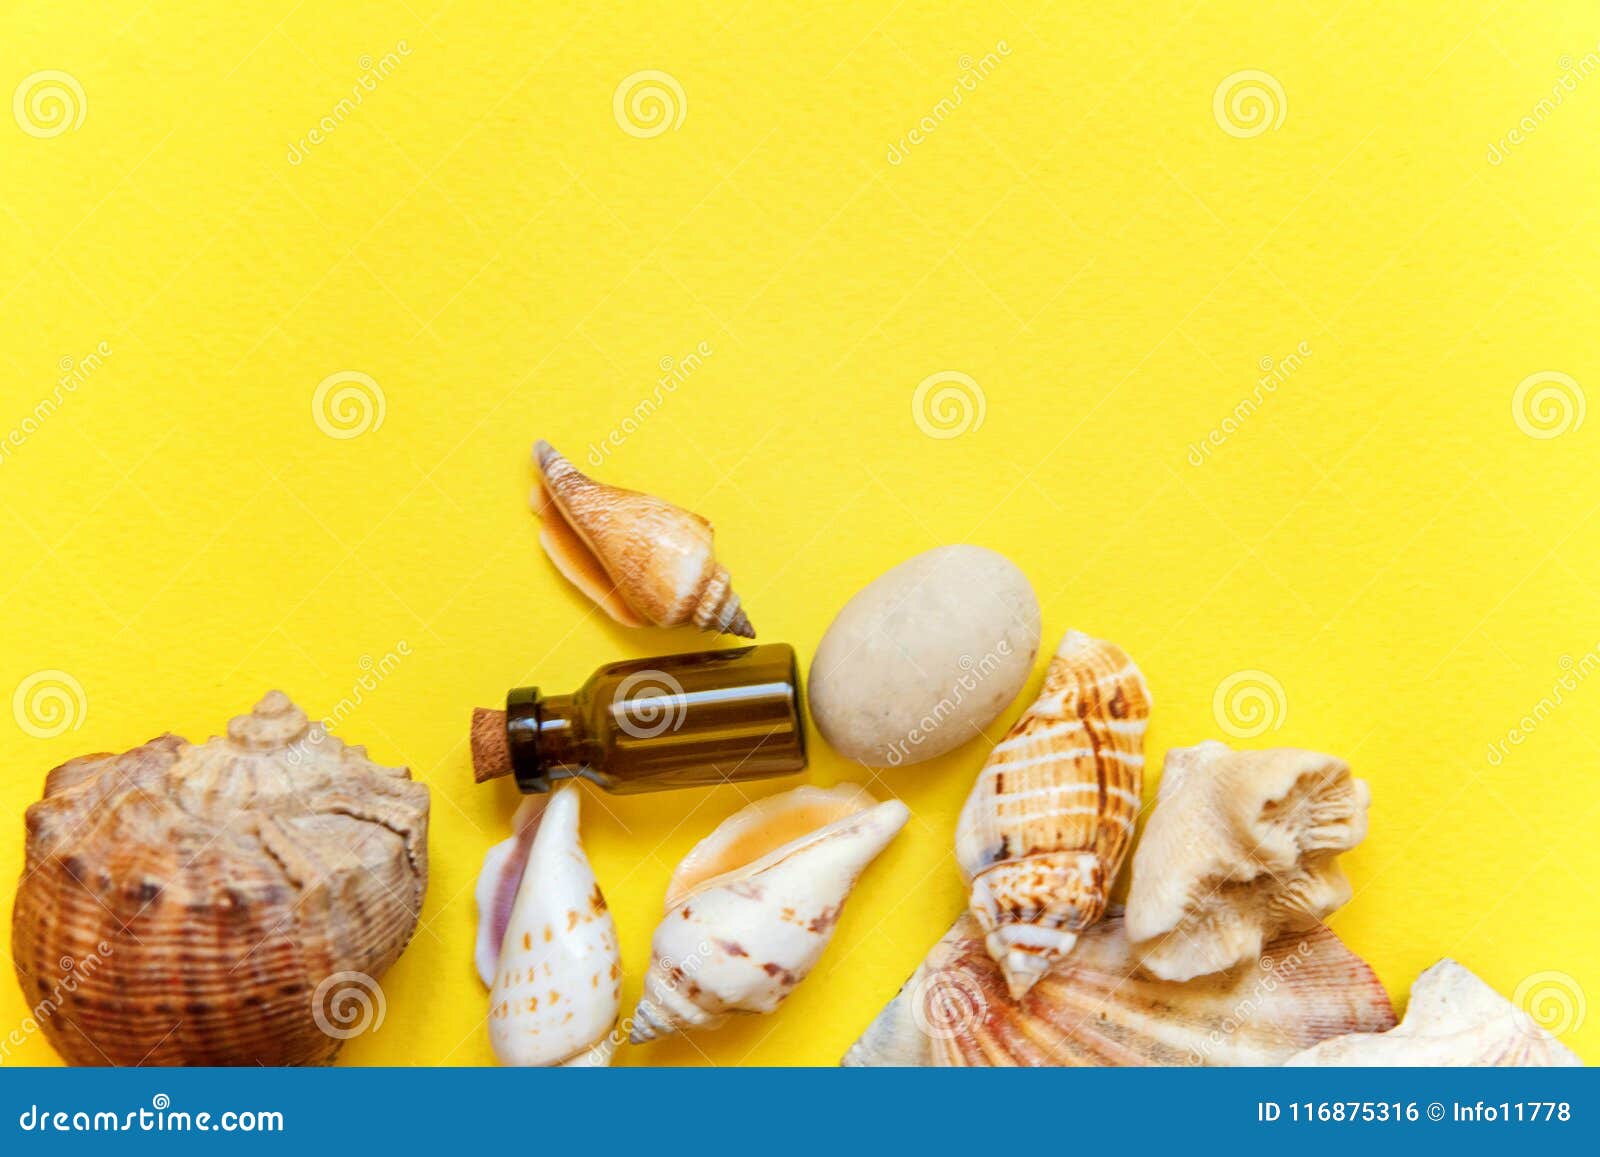 Download Seashells And Glass Bottle On A Yellow Background Stock Photo Image Of Sand Summer 116875316 Yellowimages Mockups